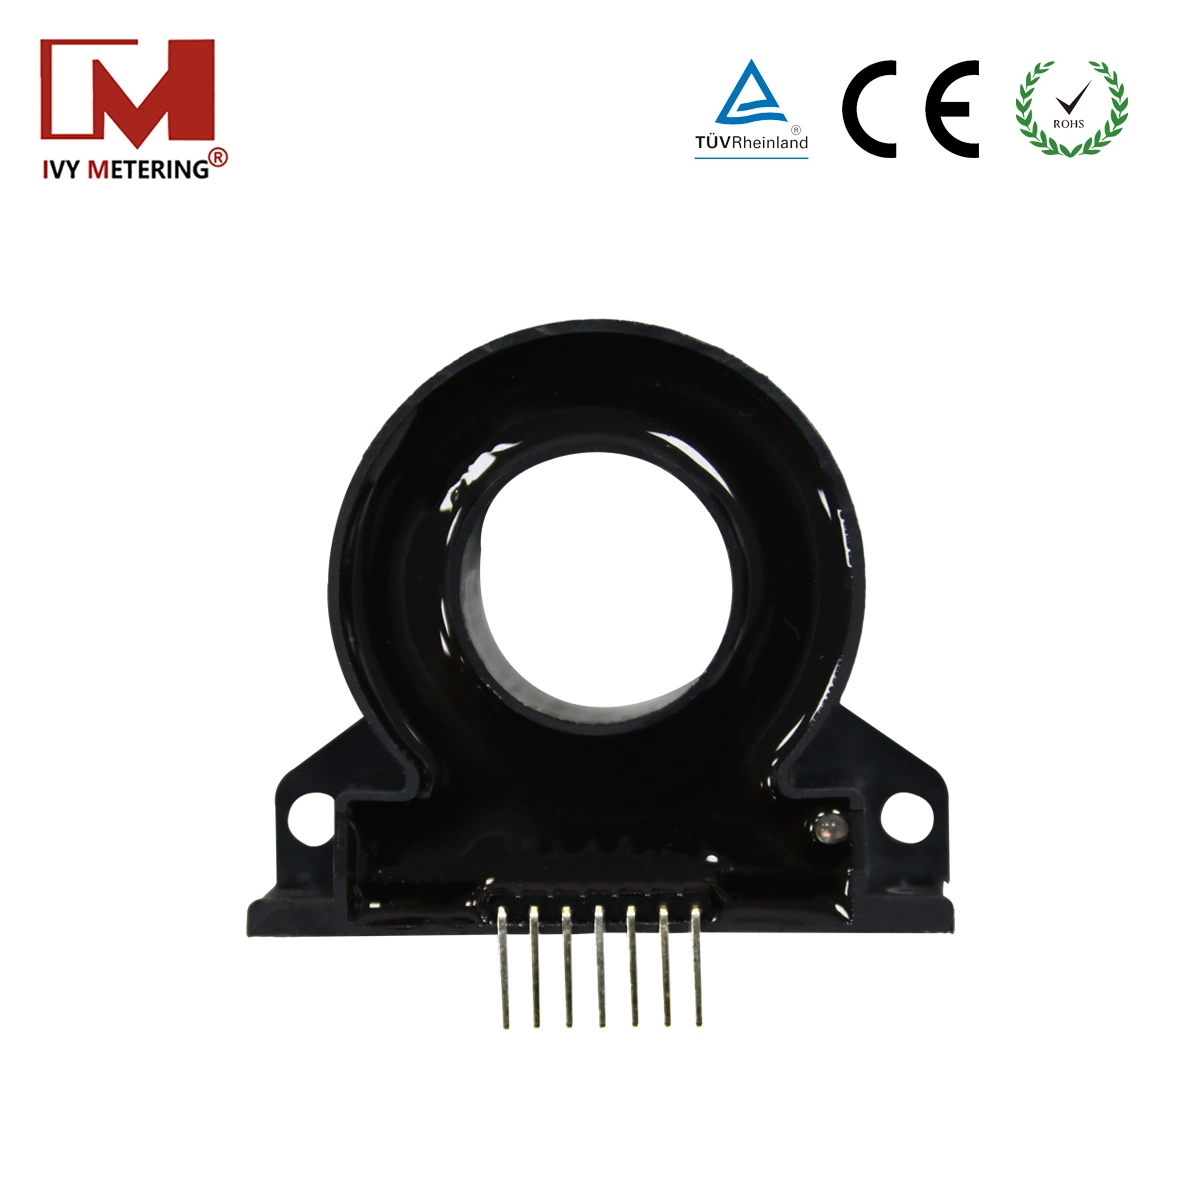 PCB Mount AC/DC Ma Earth Leakage Current Transformer for Electric Vehicle Charging